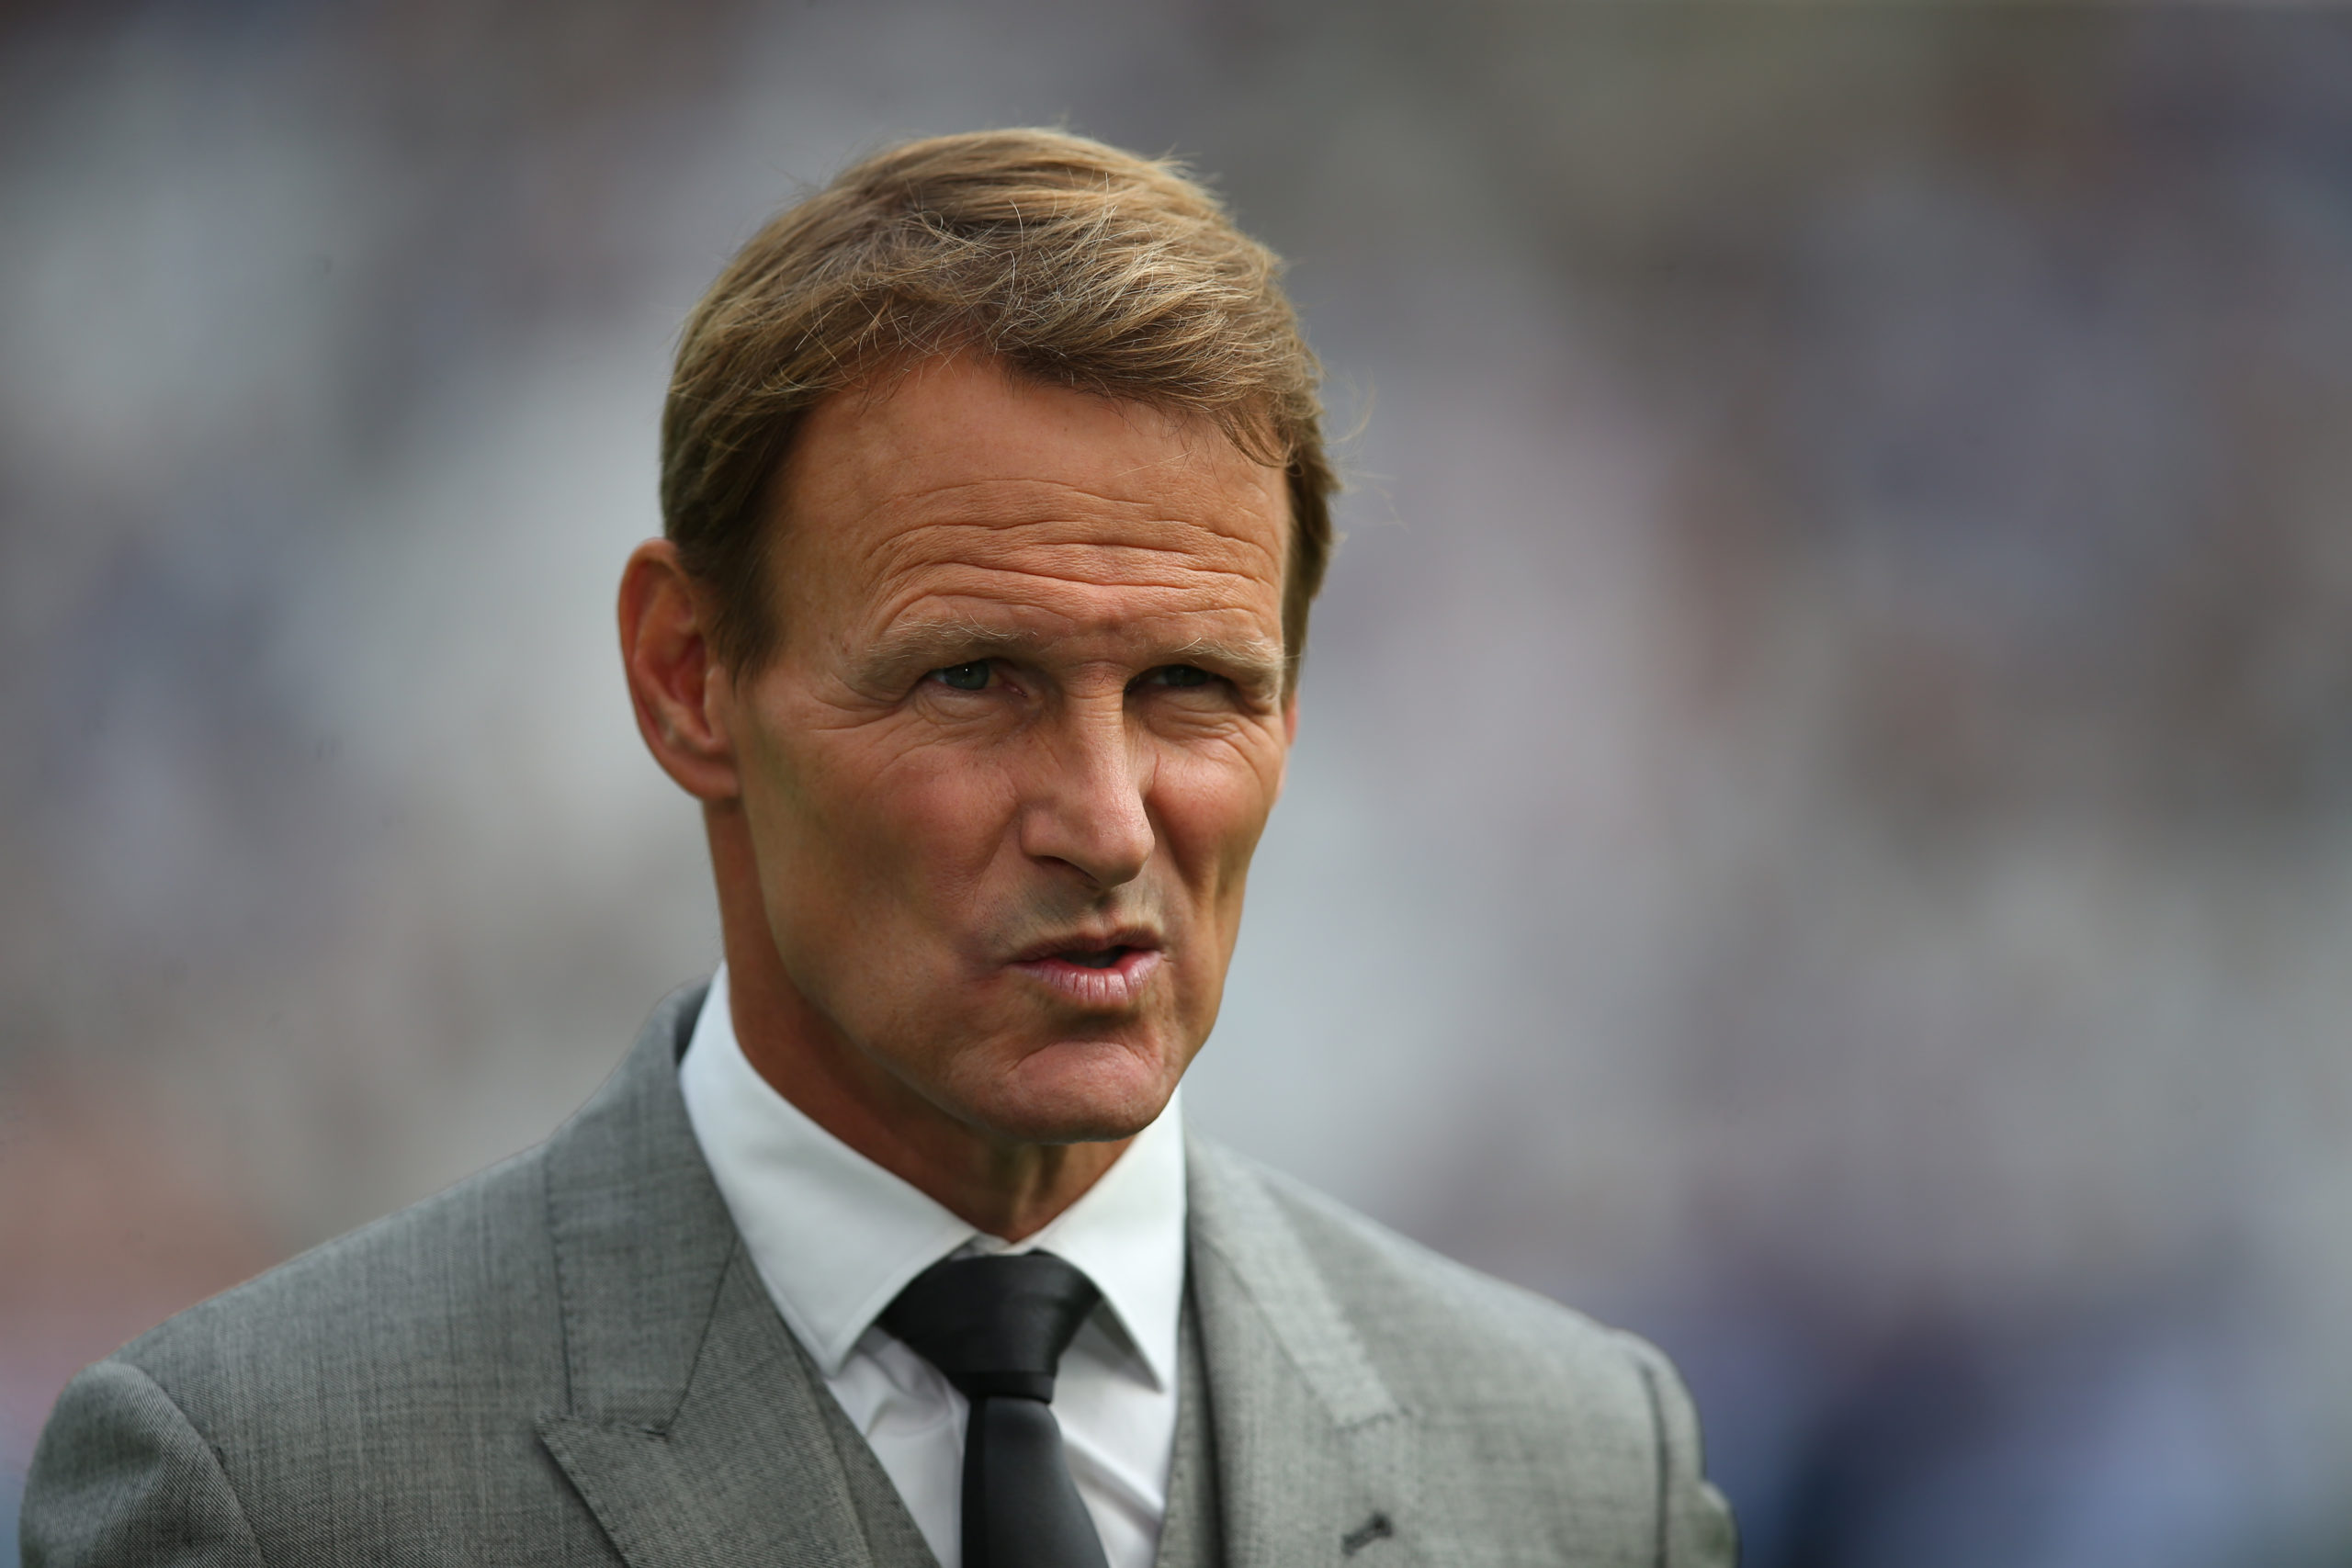 Teddy Sheringham has some strong advice for West Ham regarding Declan Rice